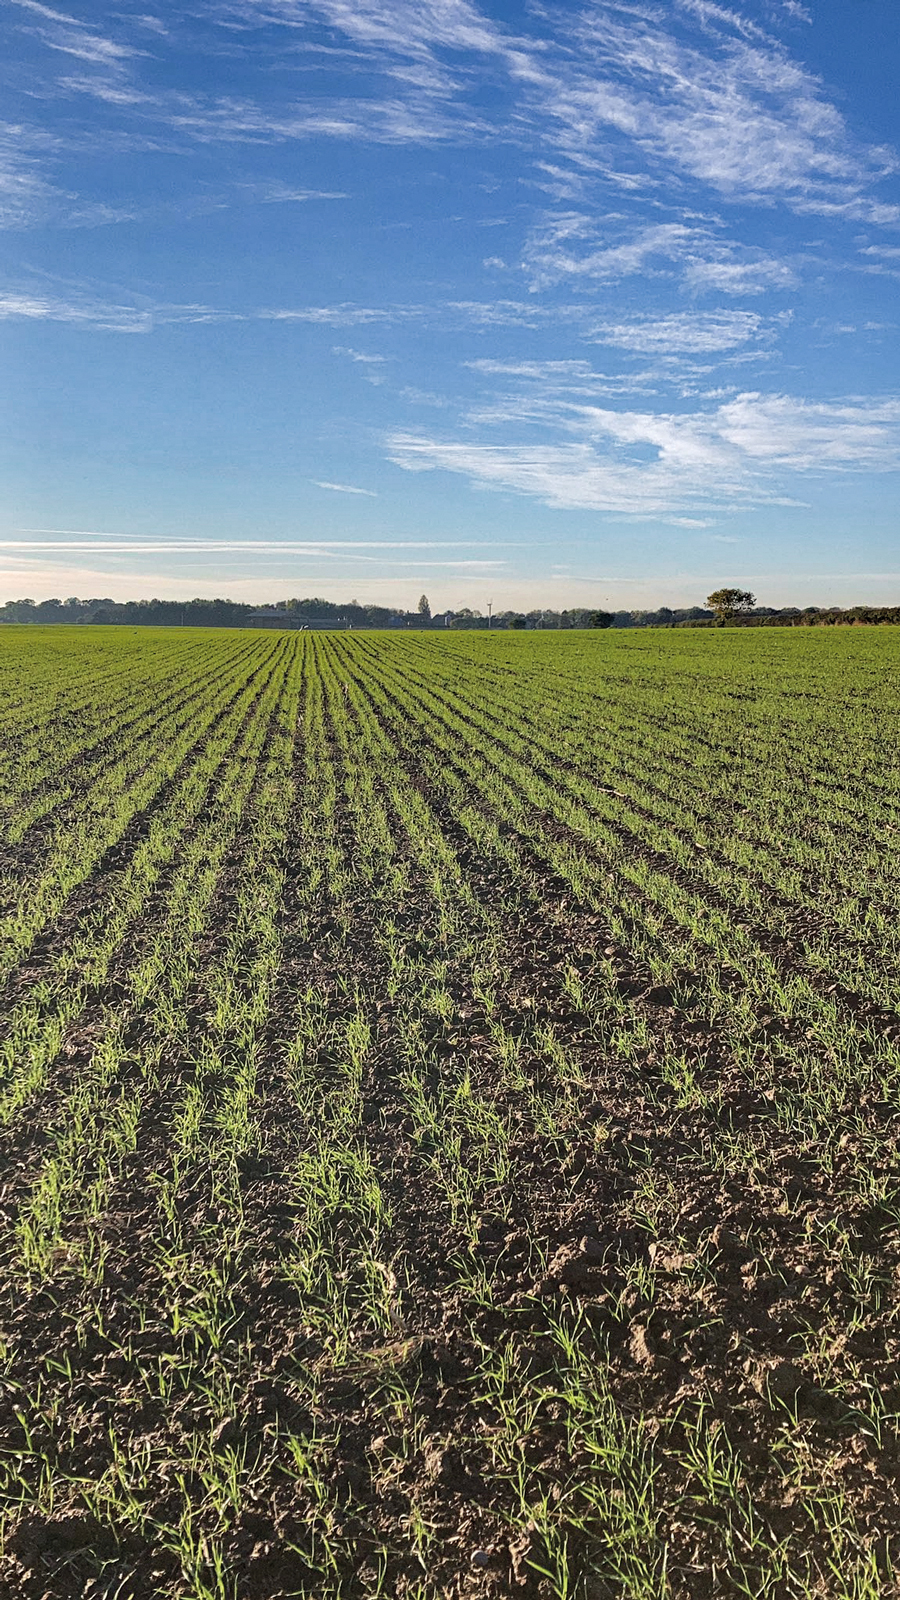 Soil care and crop health – more than just tillage